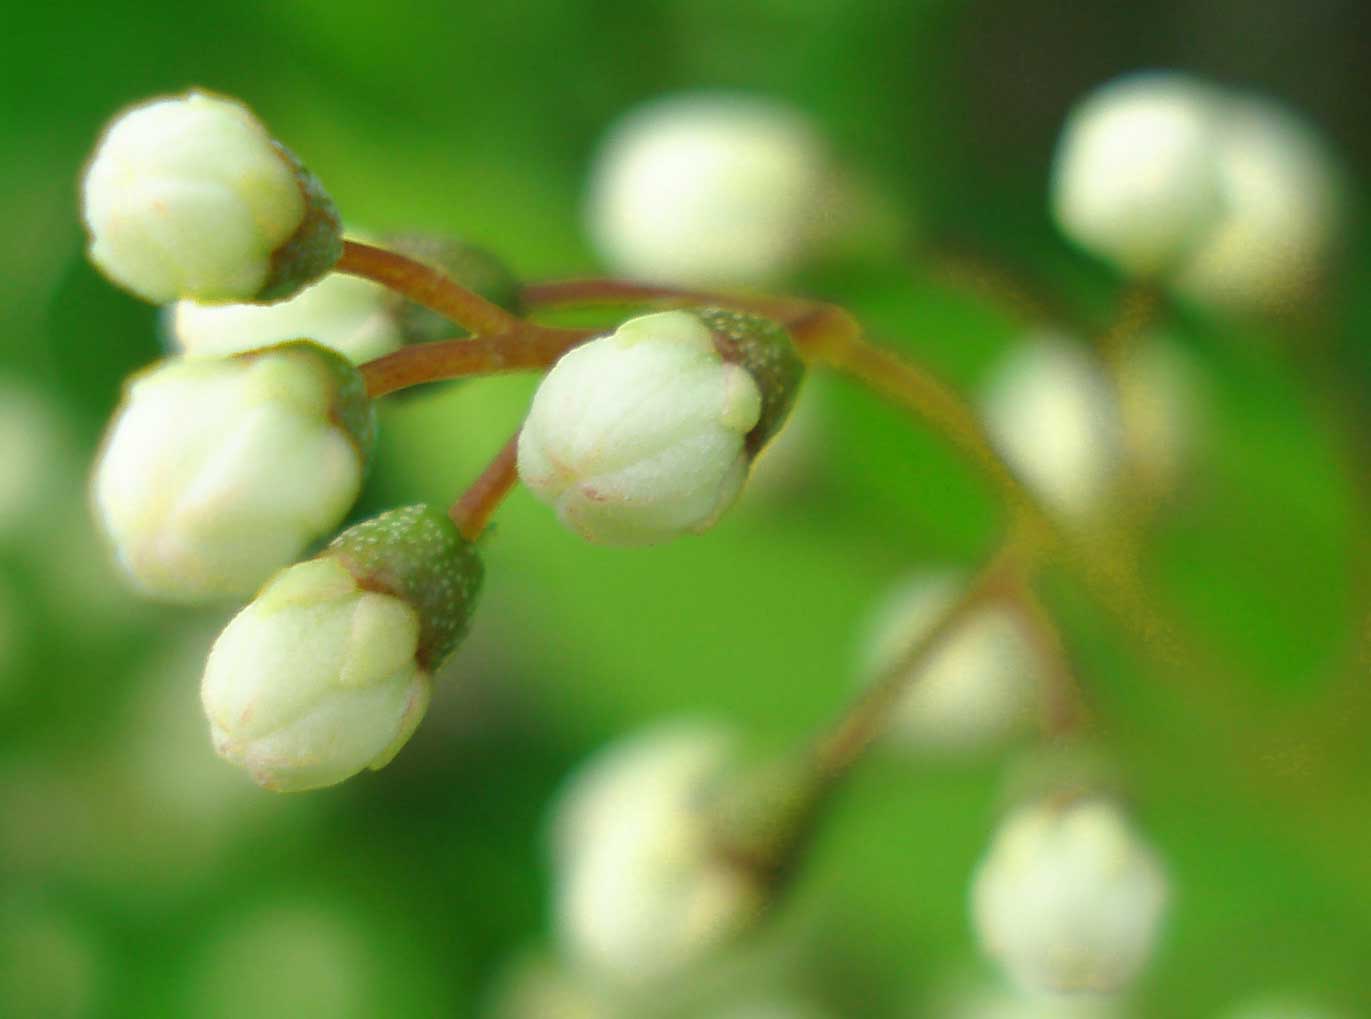 a bush is seen with white flowers on the bush